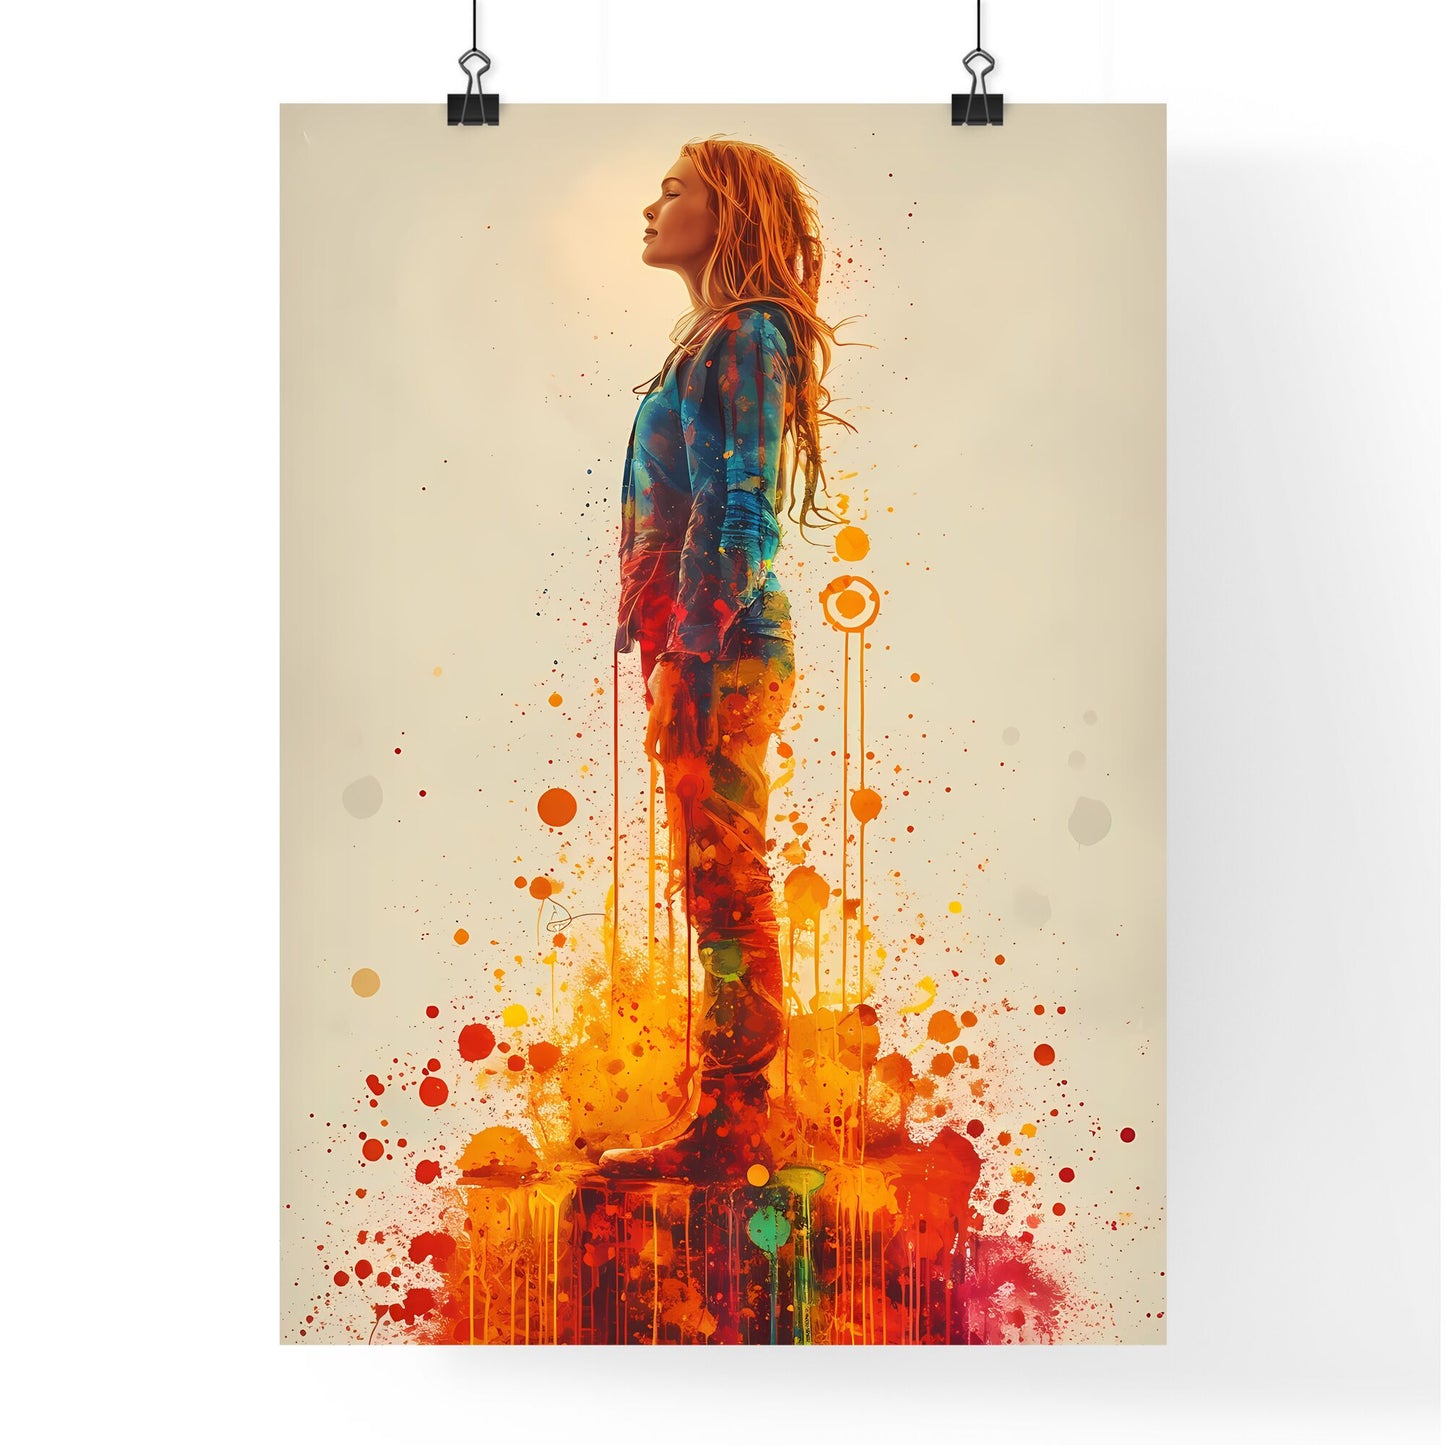 A standing woman, listining a music illustrations vector design - Art print of a woman standing on a cube Default Title